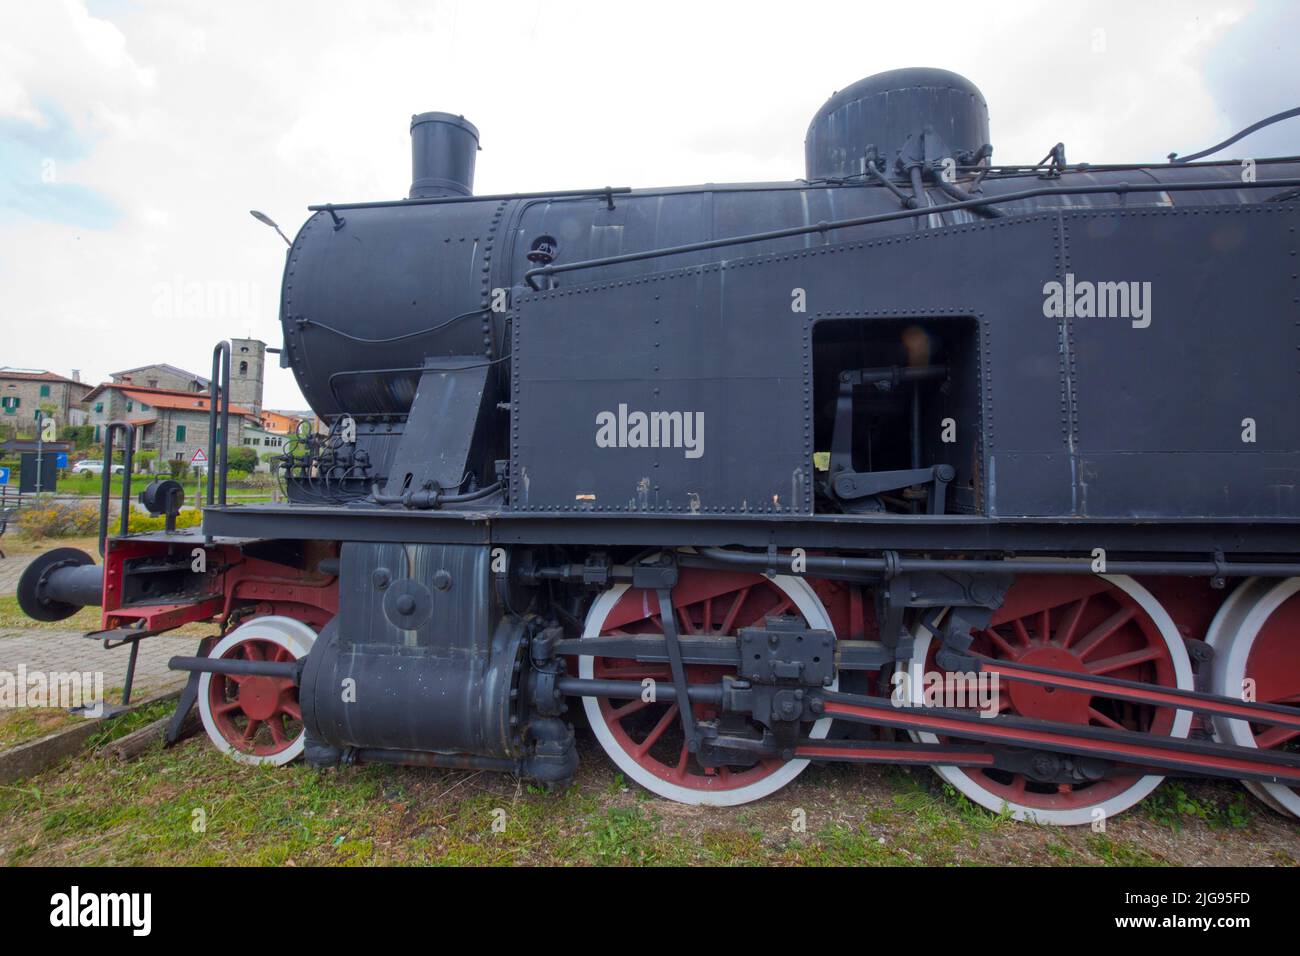 Piazza al Serchio is an Italian municipality in the province of Lucca in Tuscany, the monument locomotive 940.002 year of construction 1922 Stock Photo